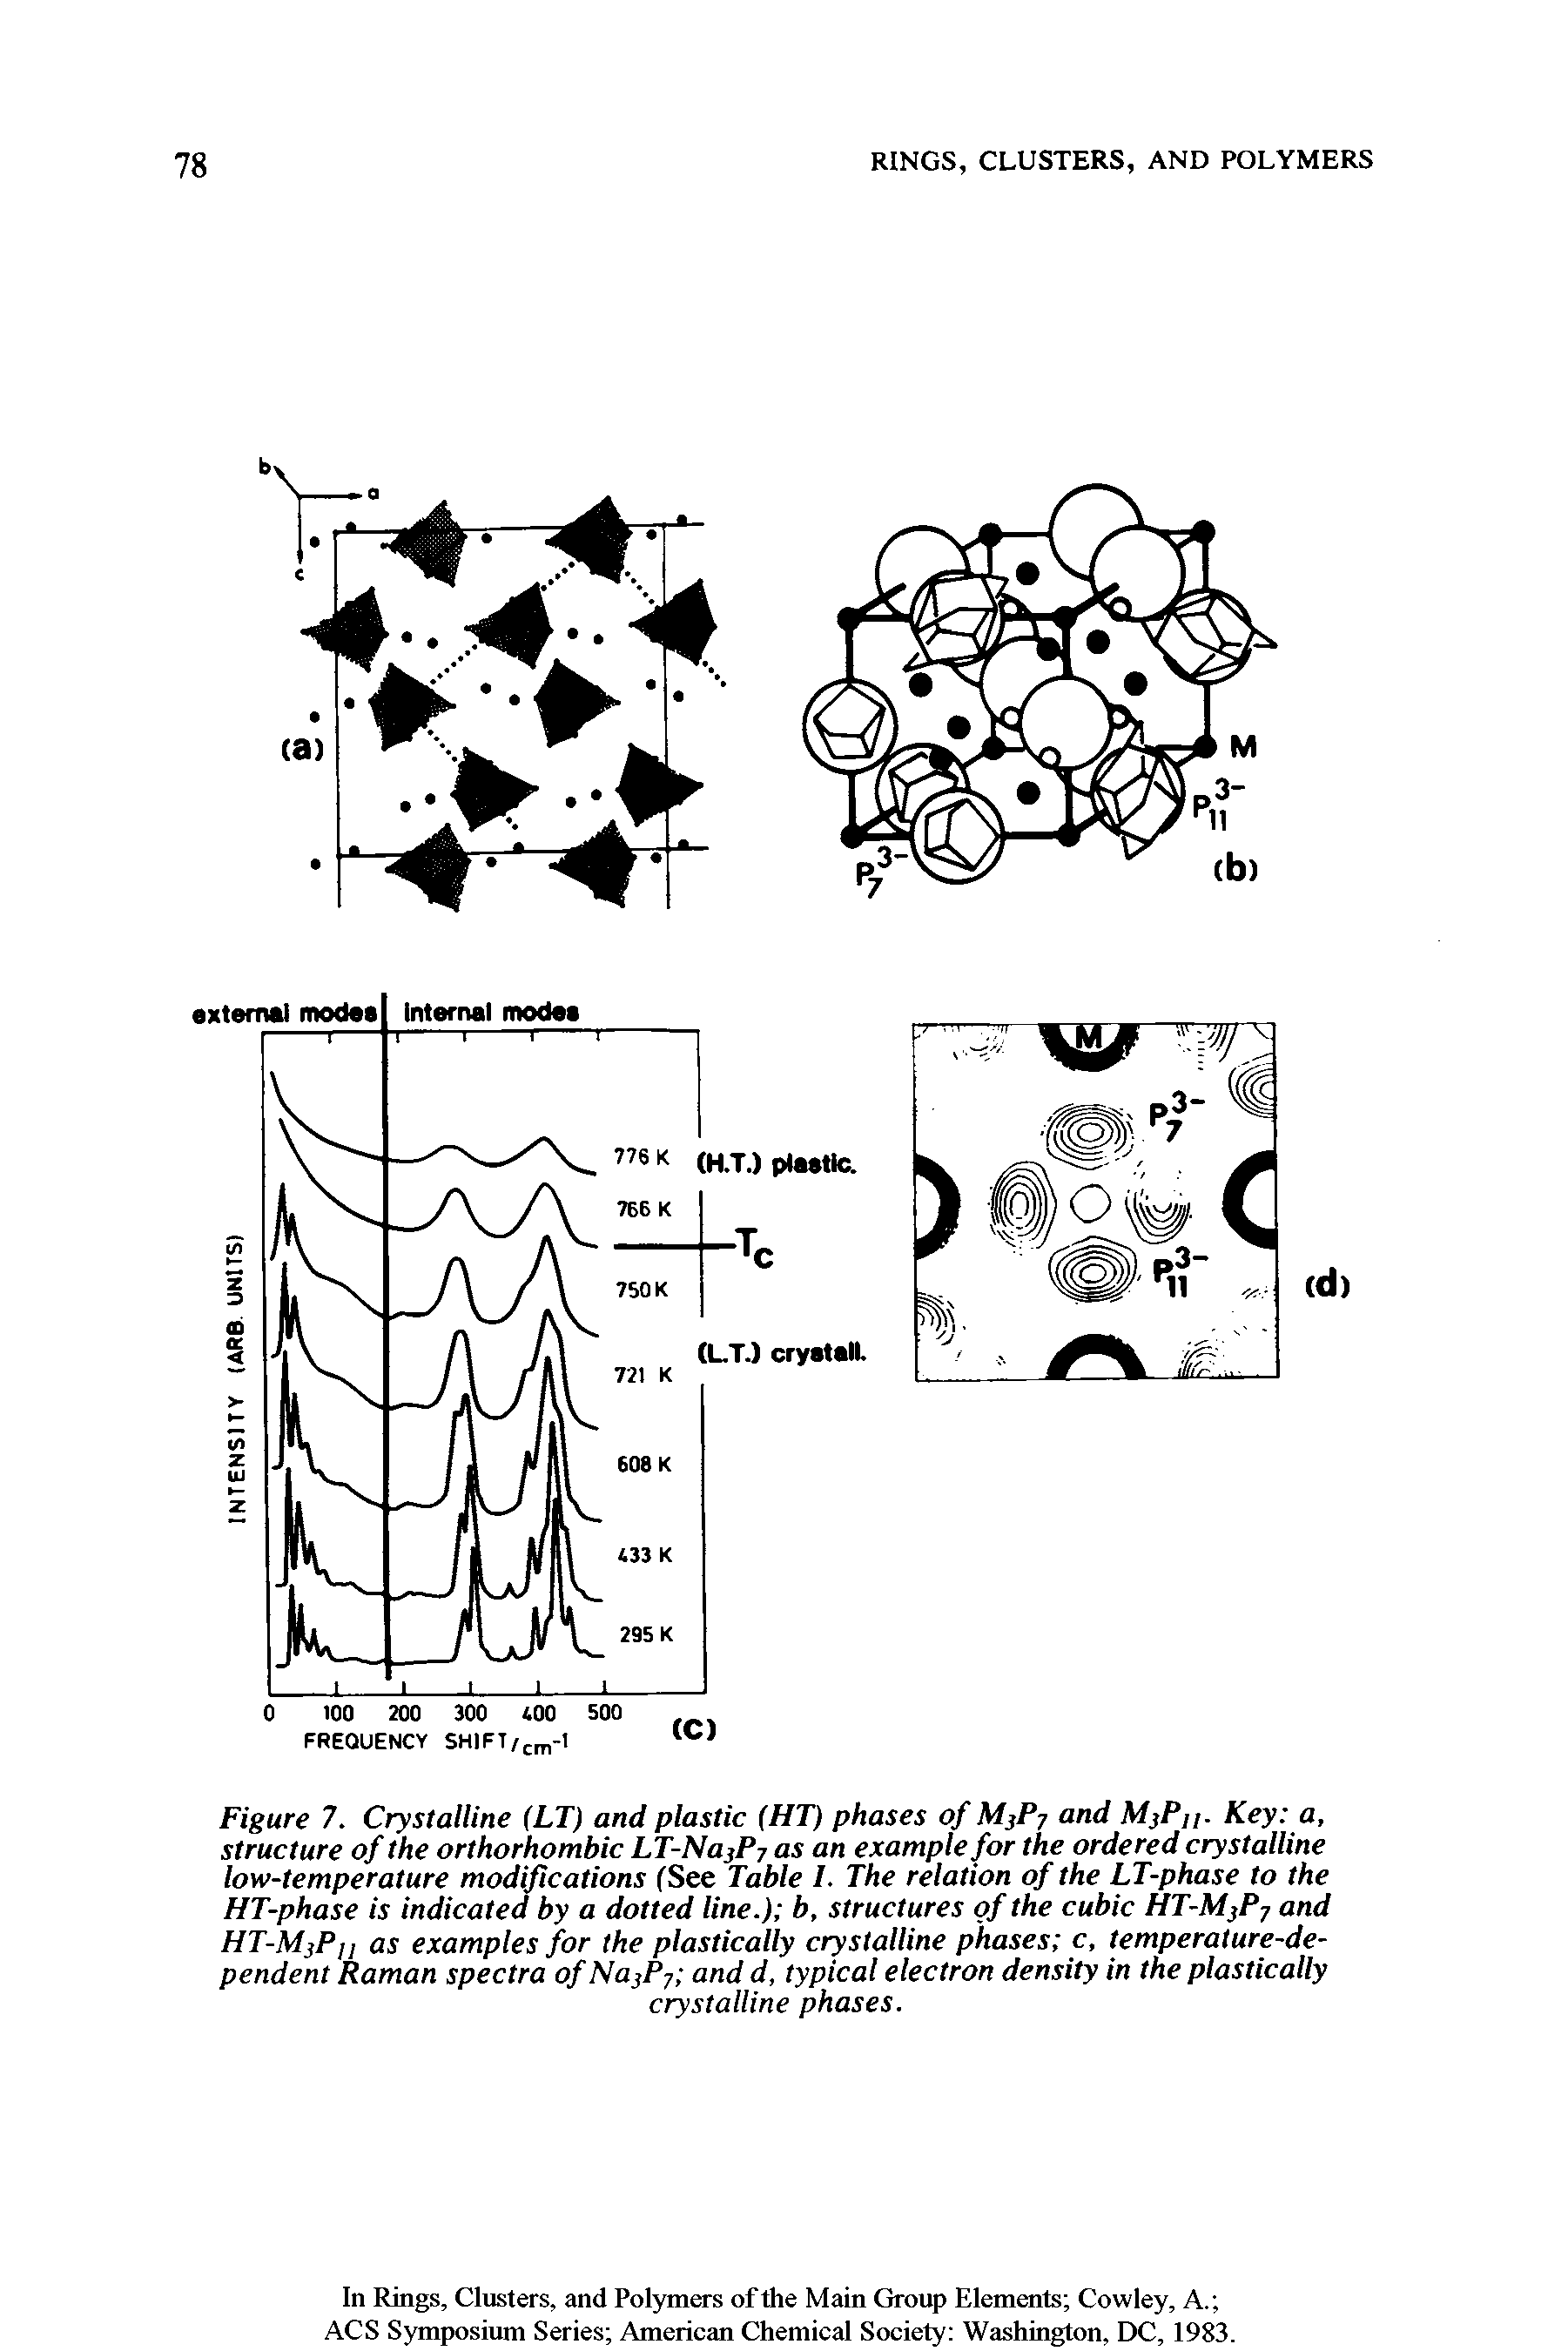 Figure 7. Crystalline (LT) and plastic (HT) phases of MjPy and MjPu. Key a, structure of the orthorhombic LT-NajPj as an example for the ordered crystalline low-temperature modifications (See Table I. The relation of the LT-phase to the HT-phase is indicated by a dotted line.) b, structures of the cubic HT-MjPj and HT-M3P11 as examples for the plastically crystalline phases c, temperature-dependent Raman spectra of Na Py and d, typical electron density in the plastically...